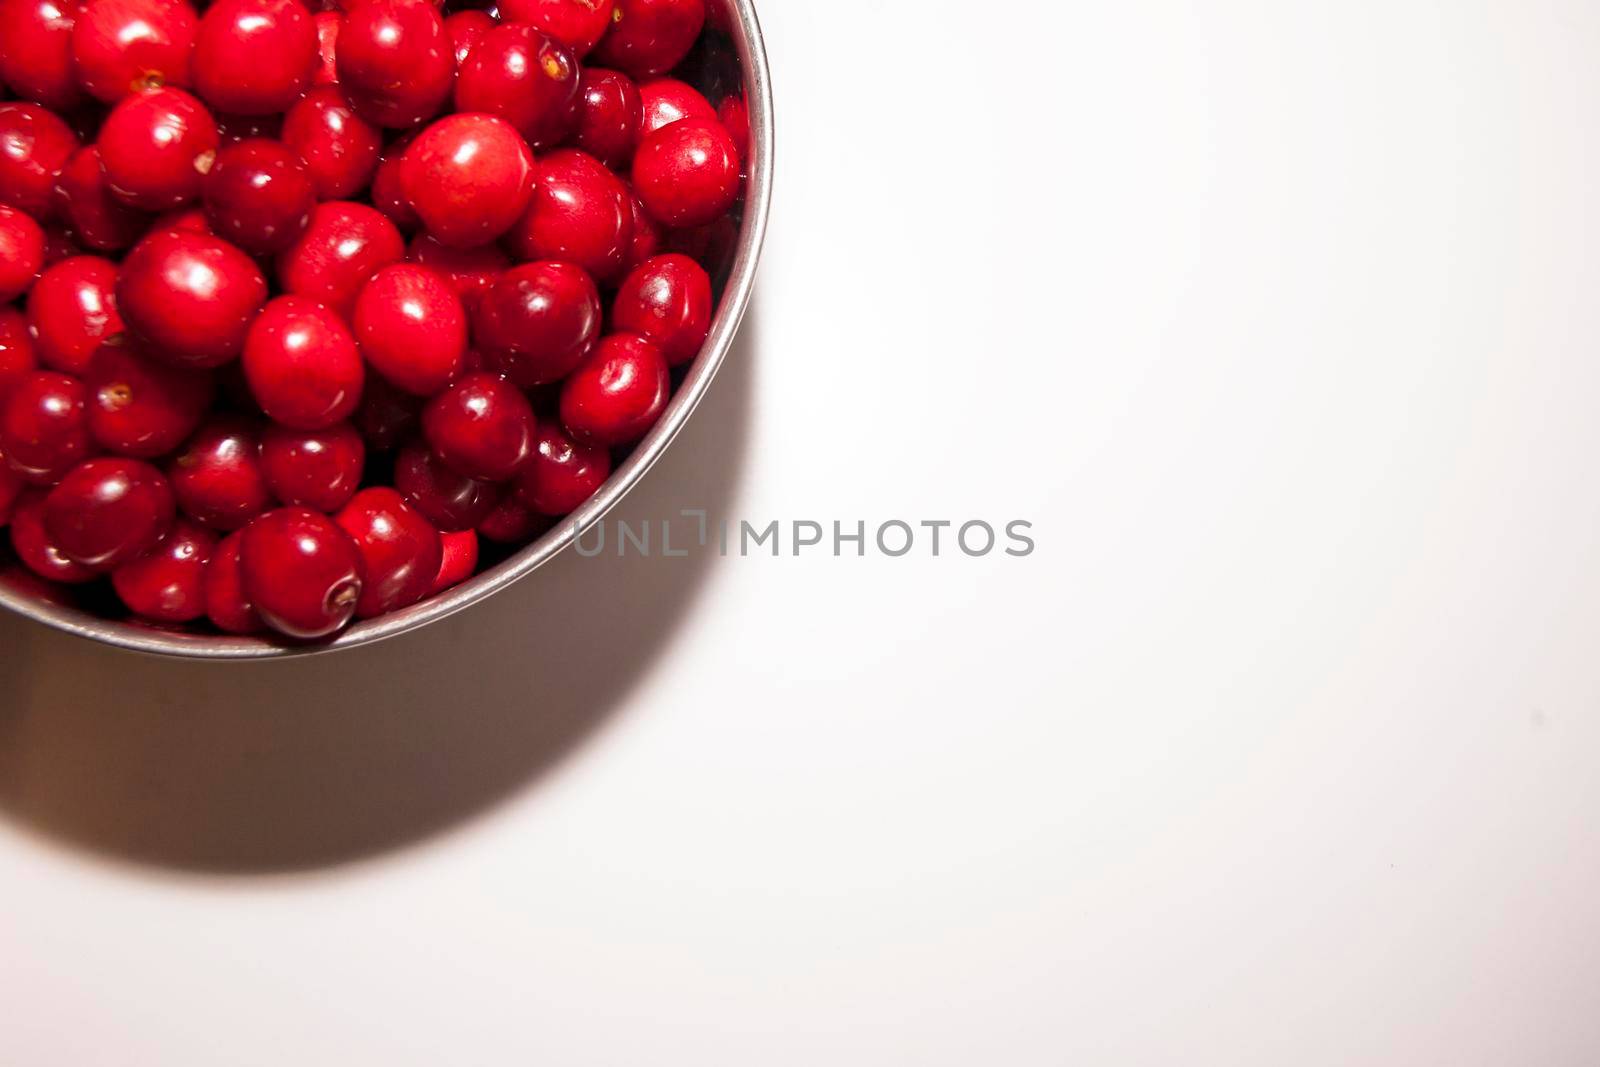 Bowl of cherries on a white background. Red cherries. Bowl placed on the top left corner of the frame